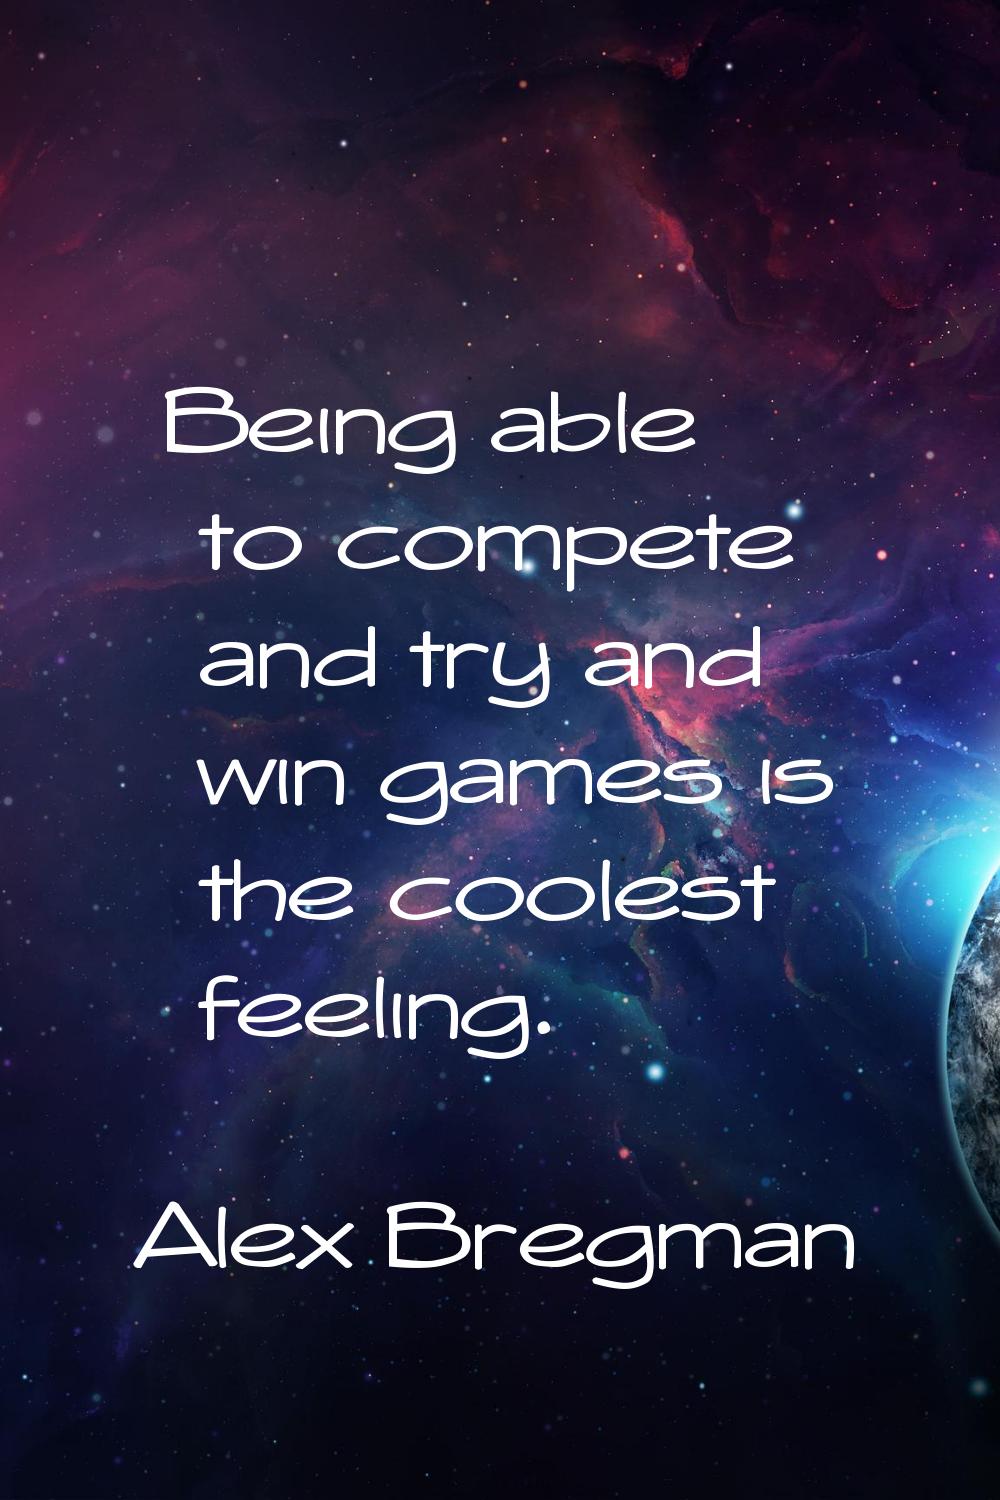 Being able to compete and try and win games is the coolest feeling.